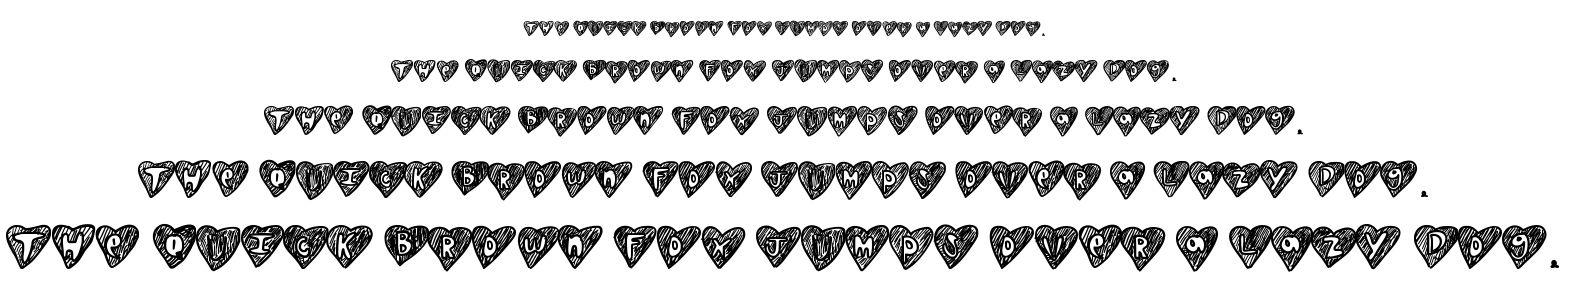 Over hearts font